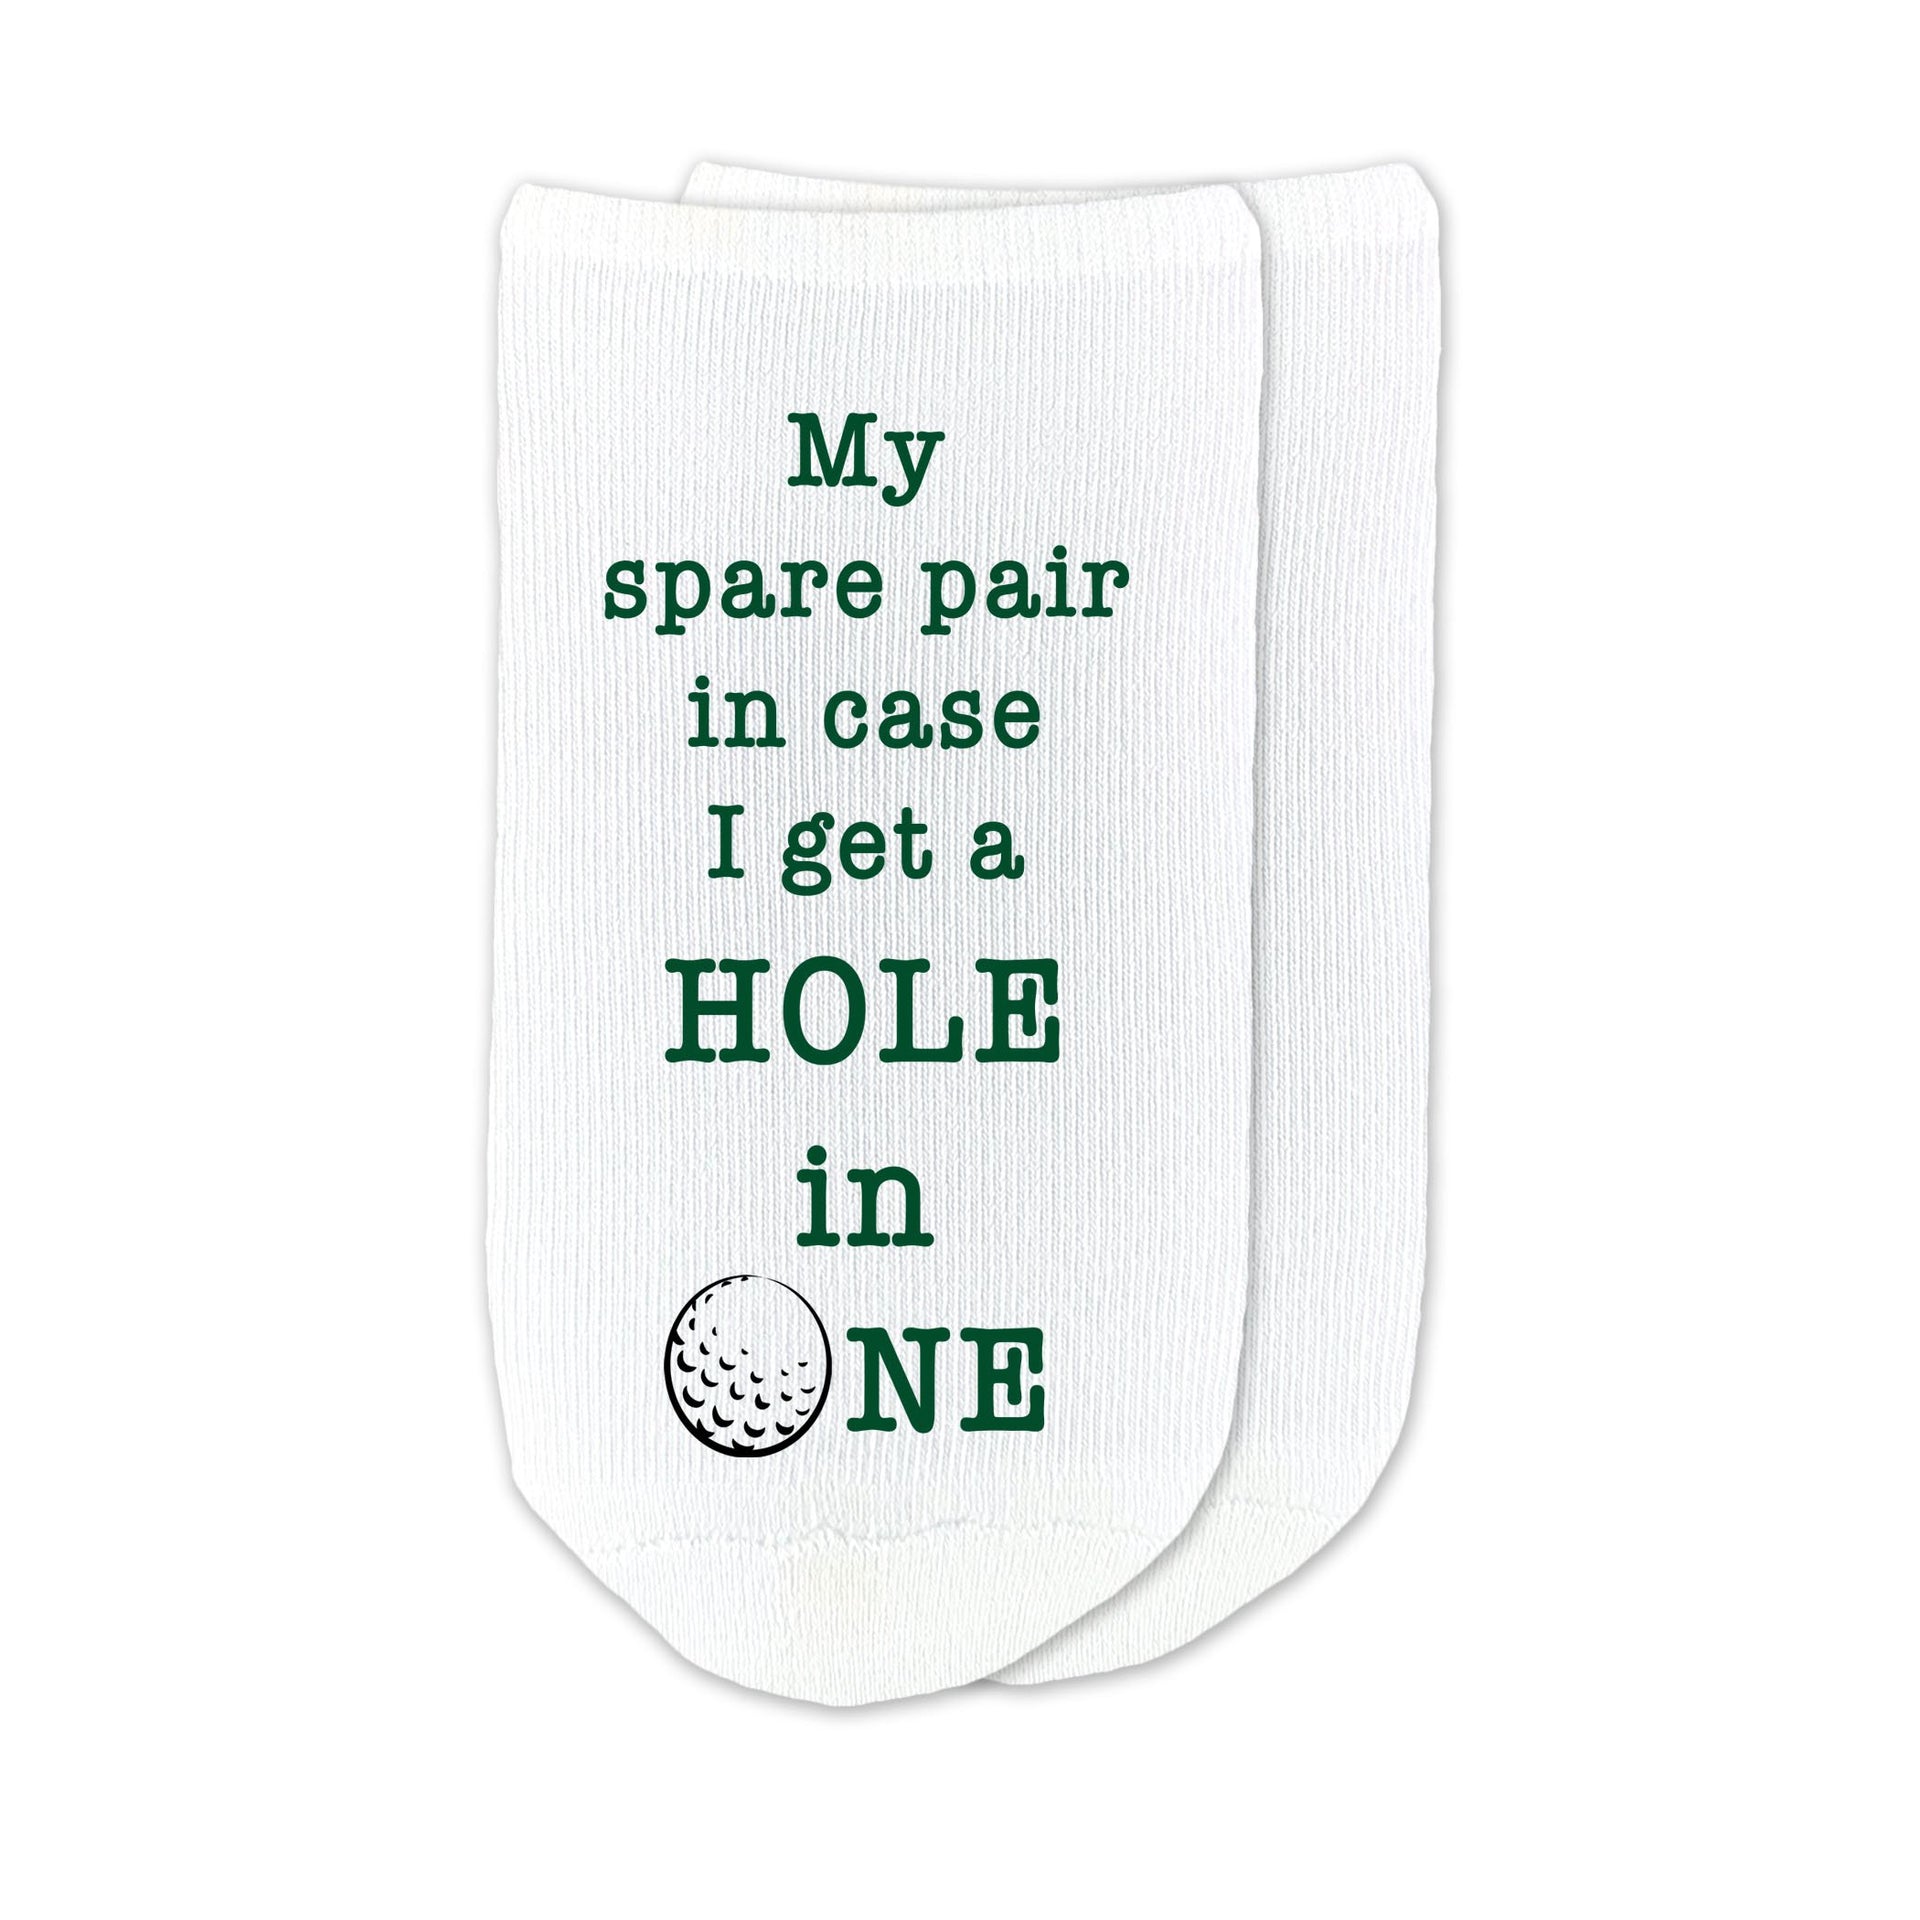 Funny hole in one golf socks for your favorite golfer, makes a great gift for any occasion like a birthday or fathers day gift